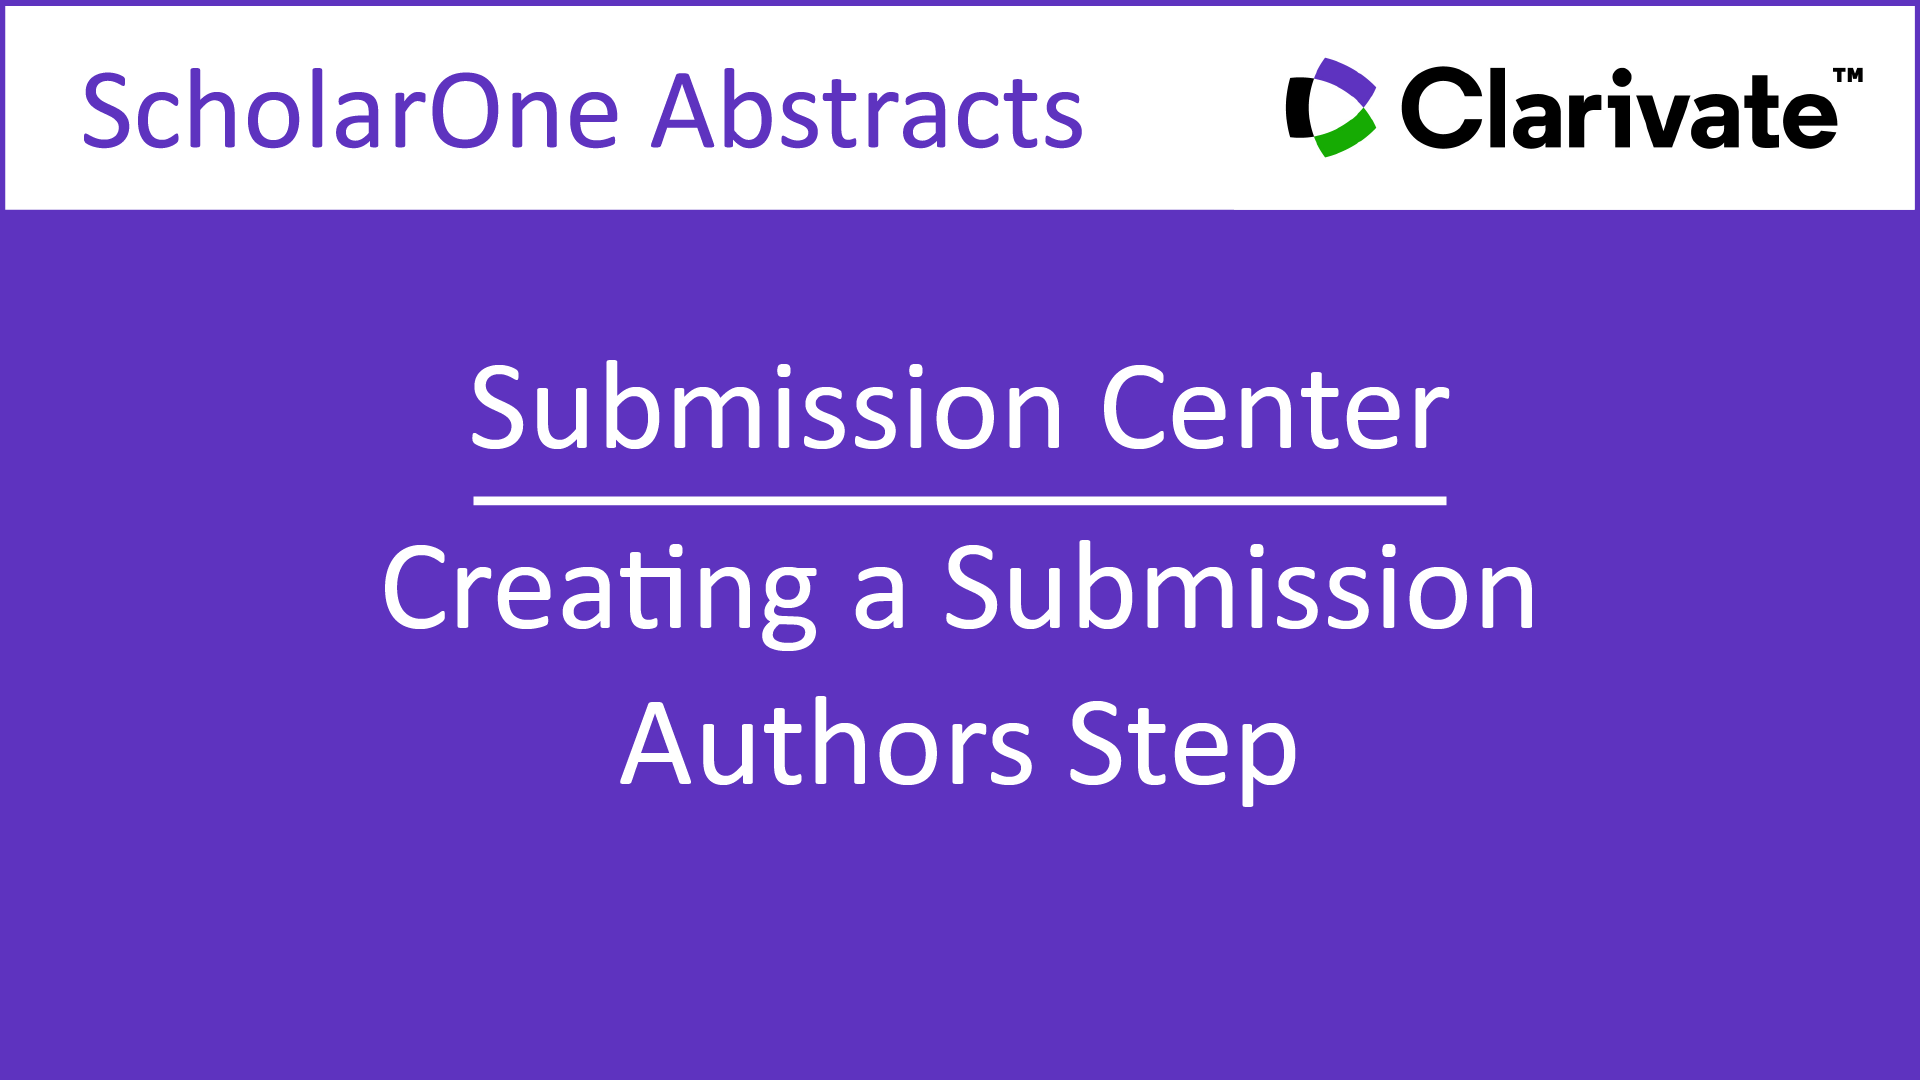 Creating a Submission: Authors Step